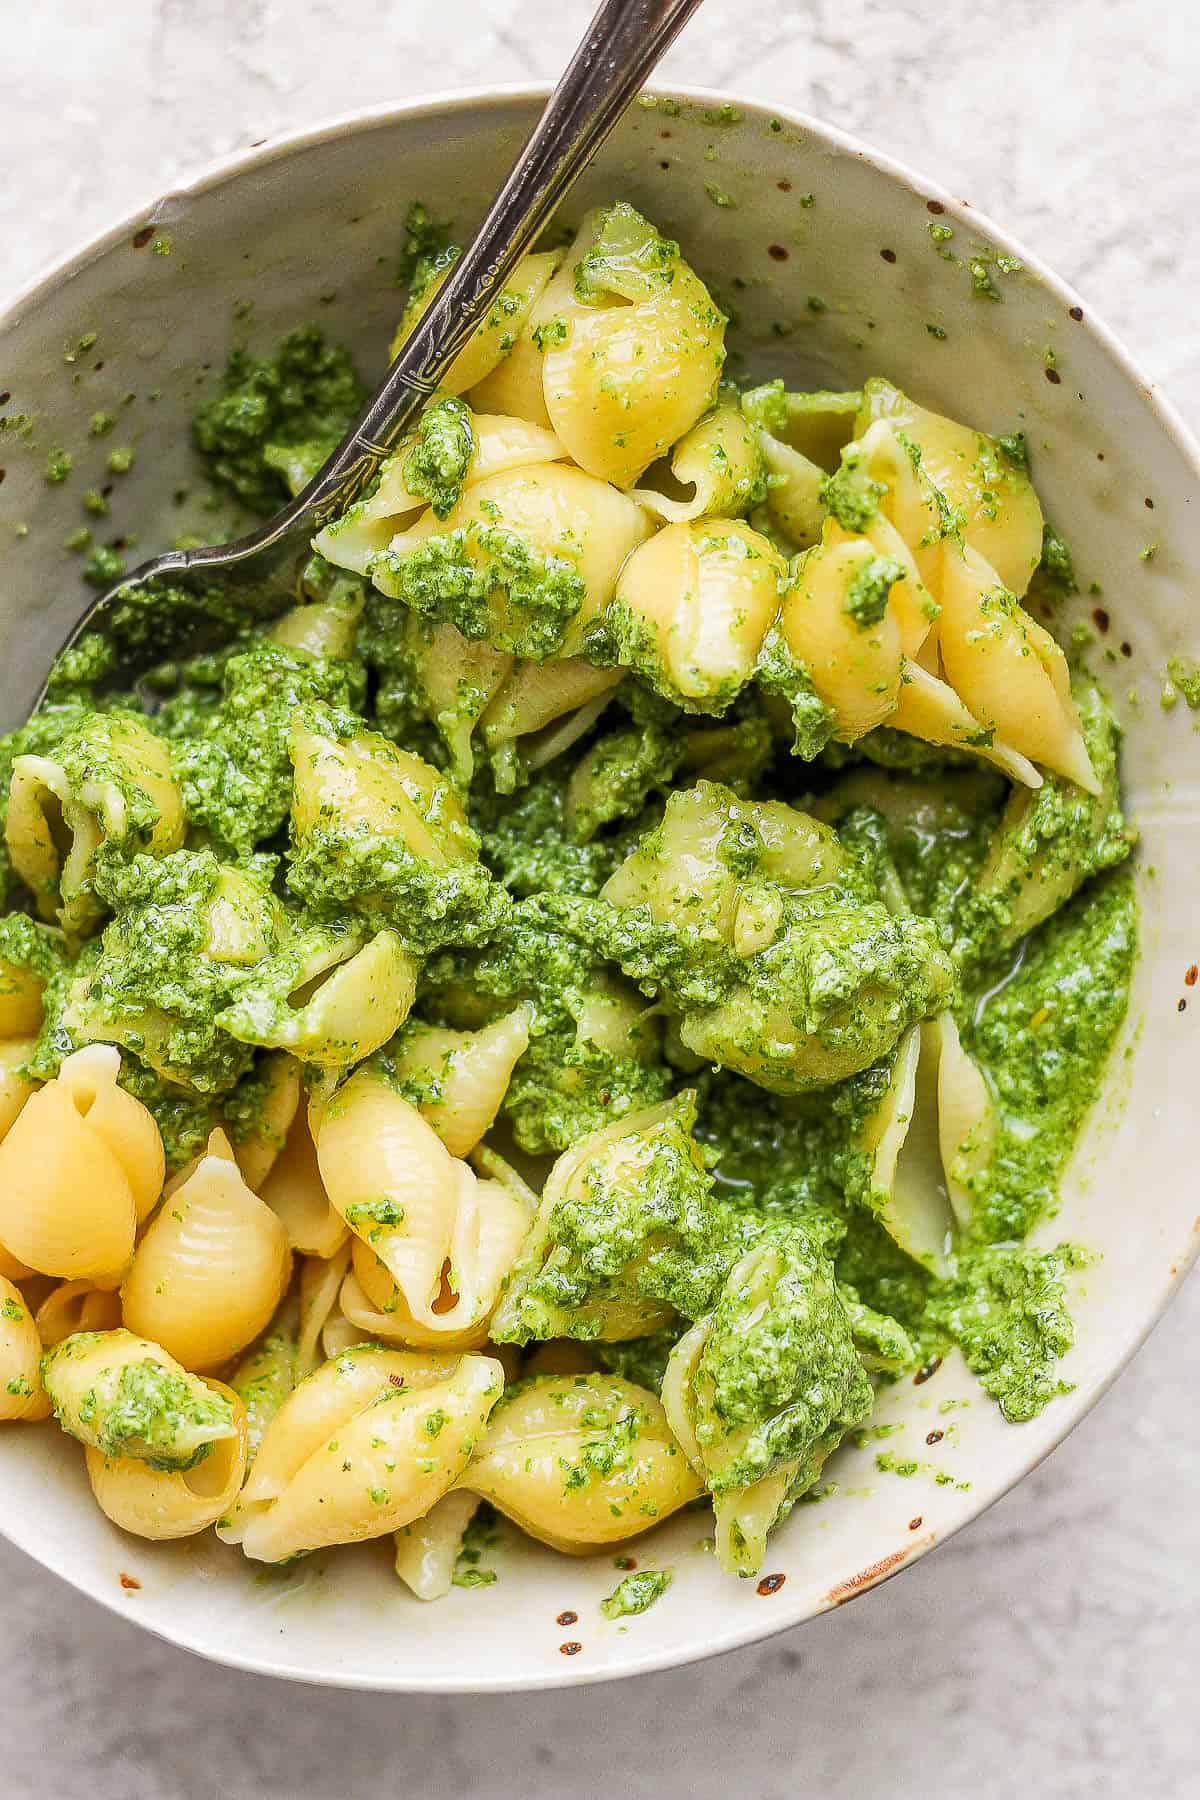 Basil pesto sauce covering all of the shells in the bowl.